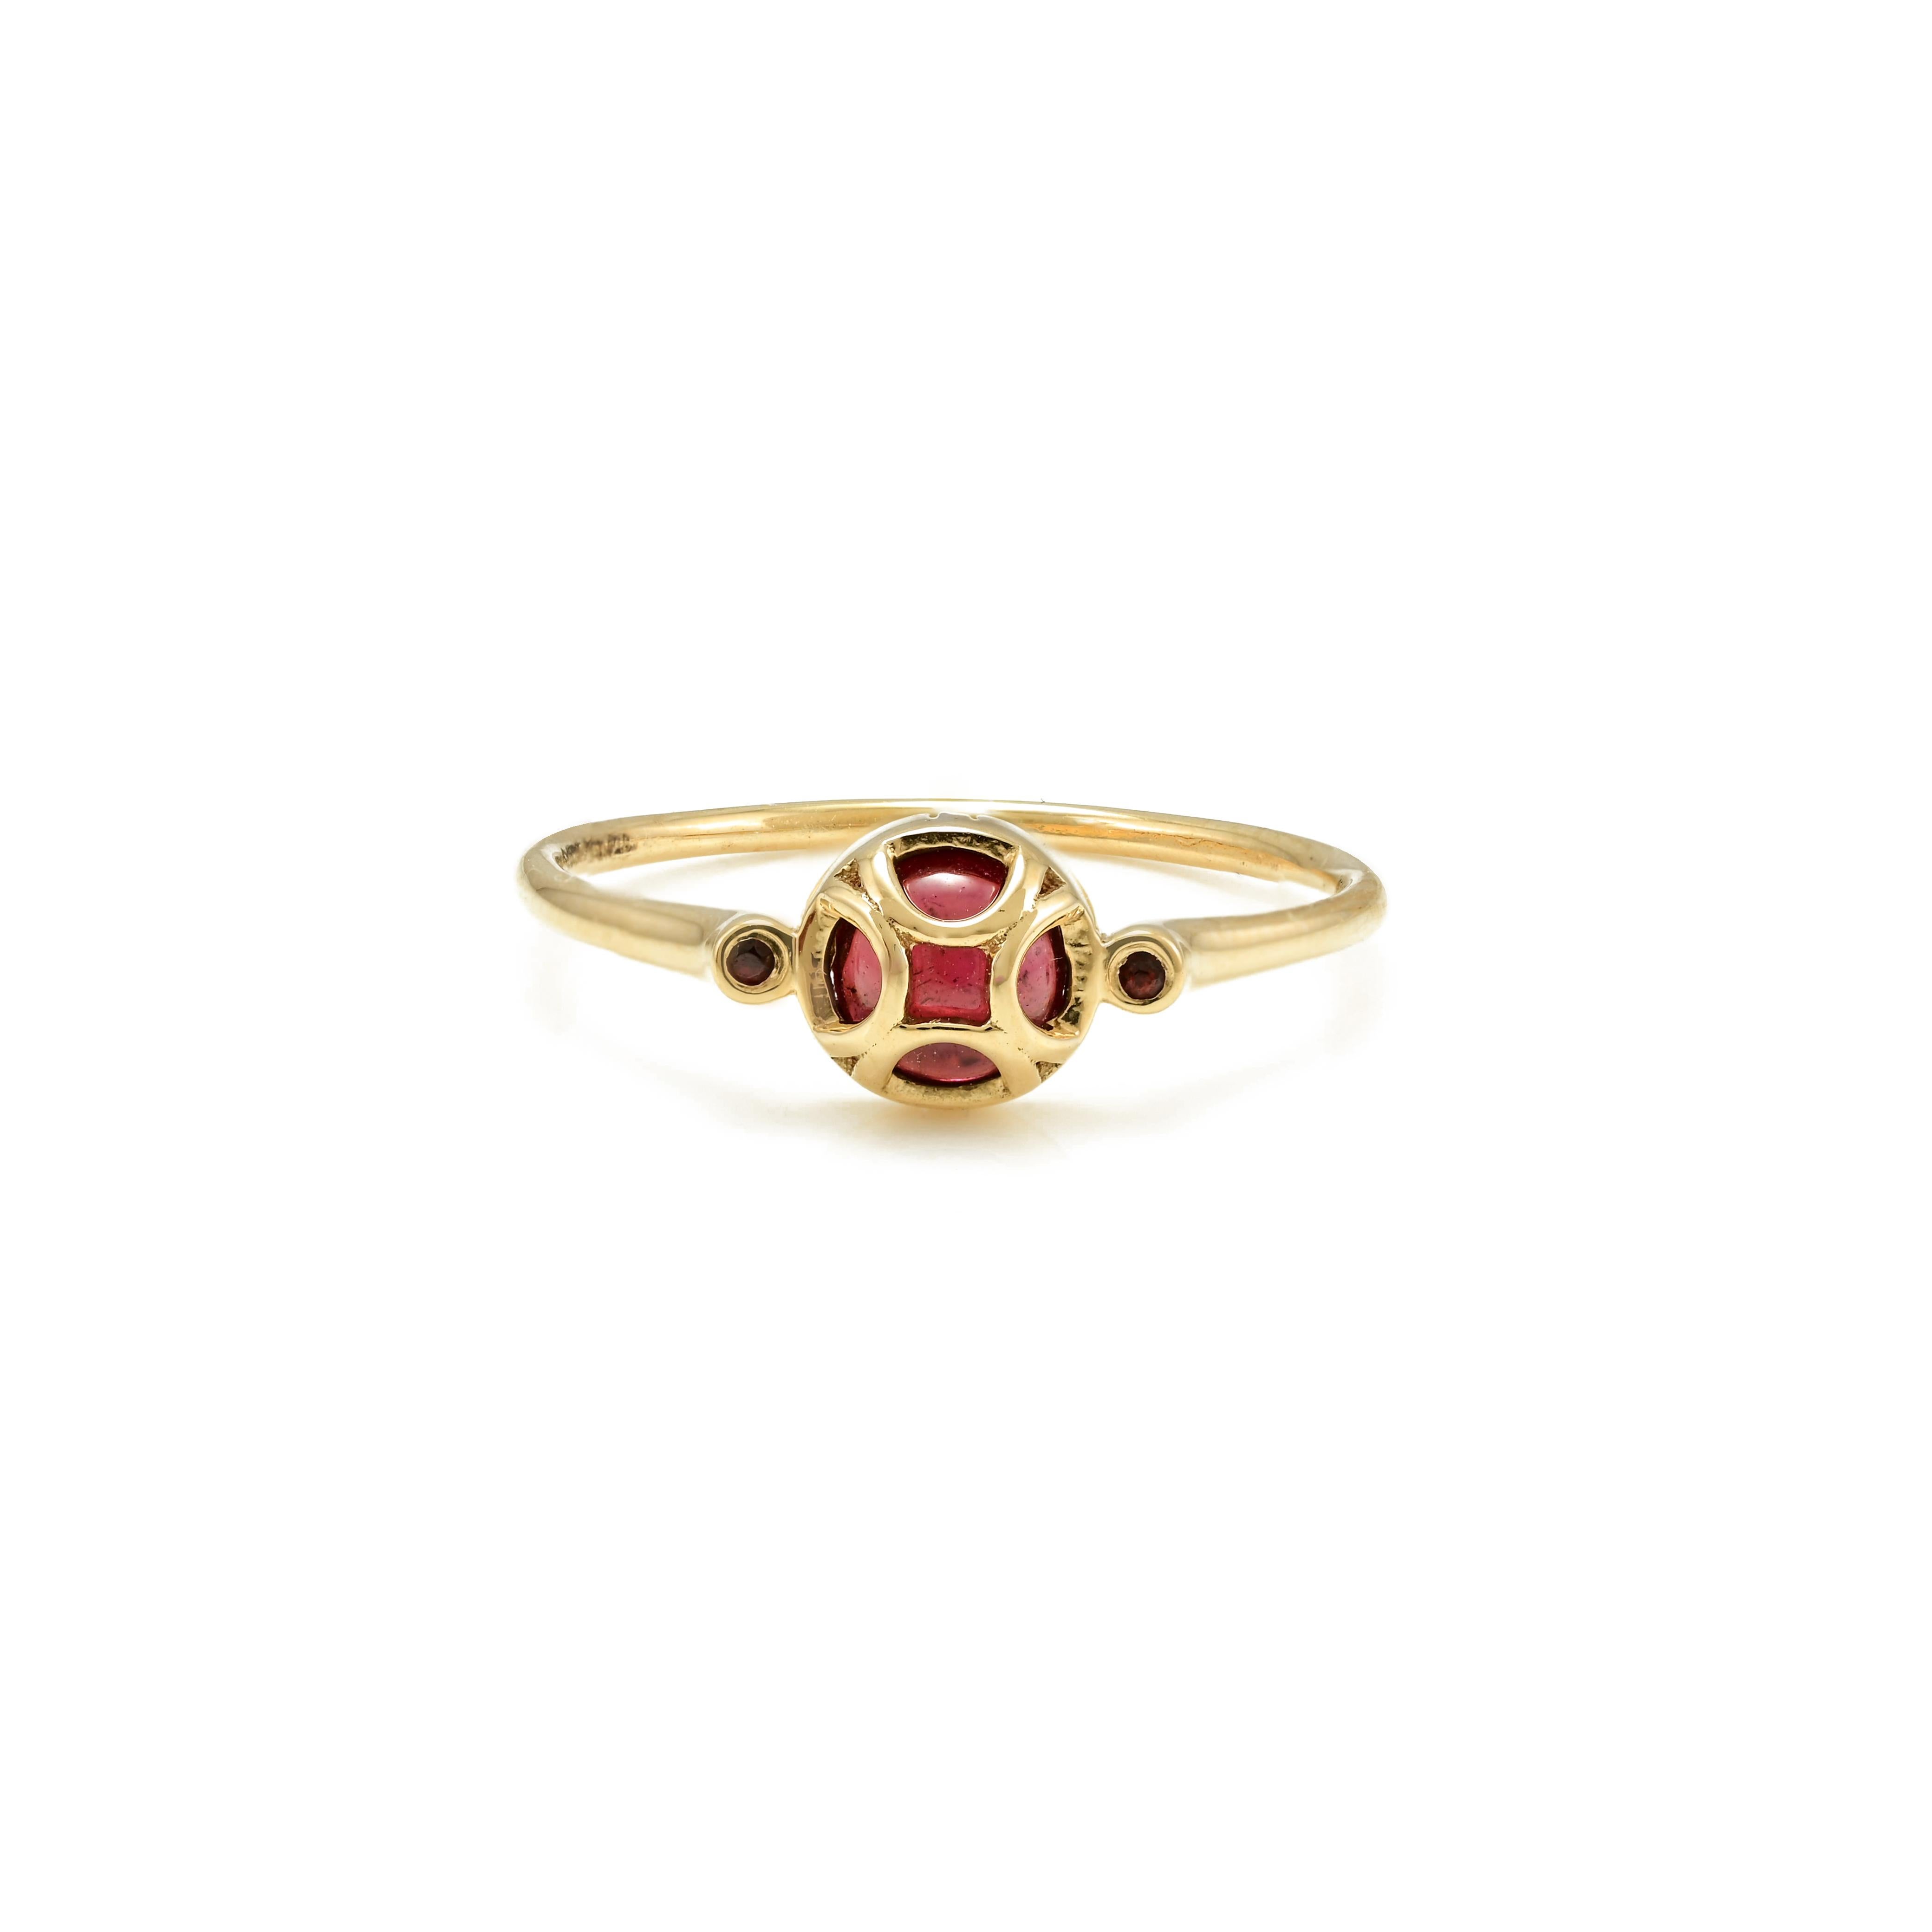 For Sale:  Everyday Minimalist Garnet Ring in 18k Solid Yellow Gold For Her 9